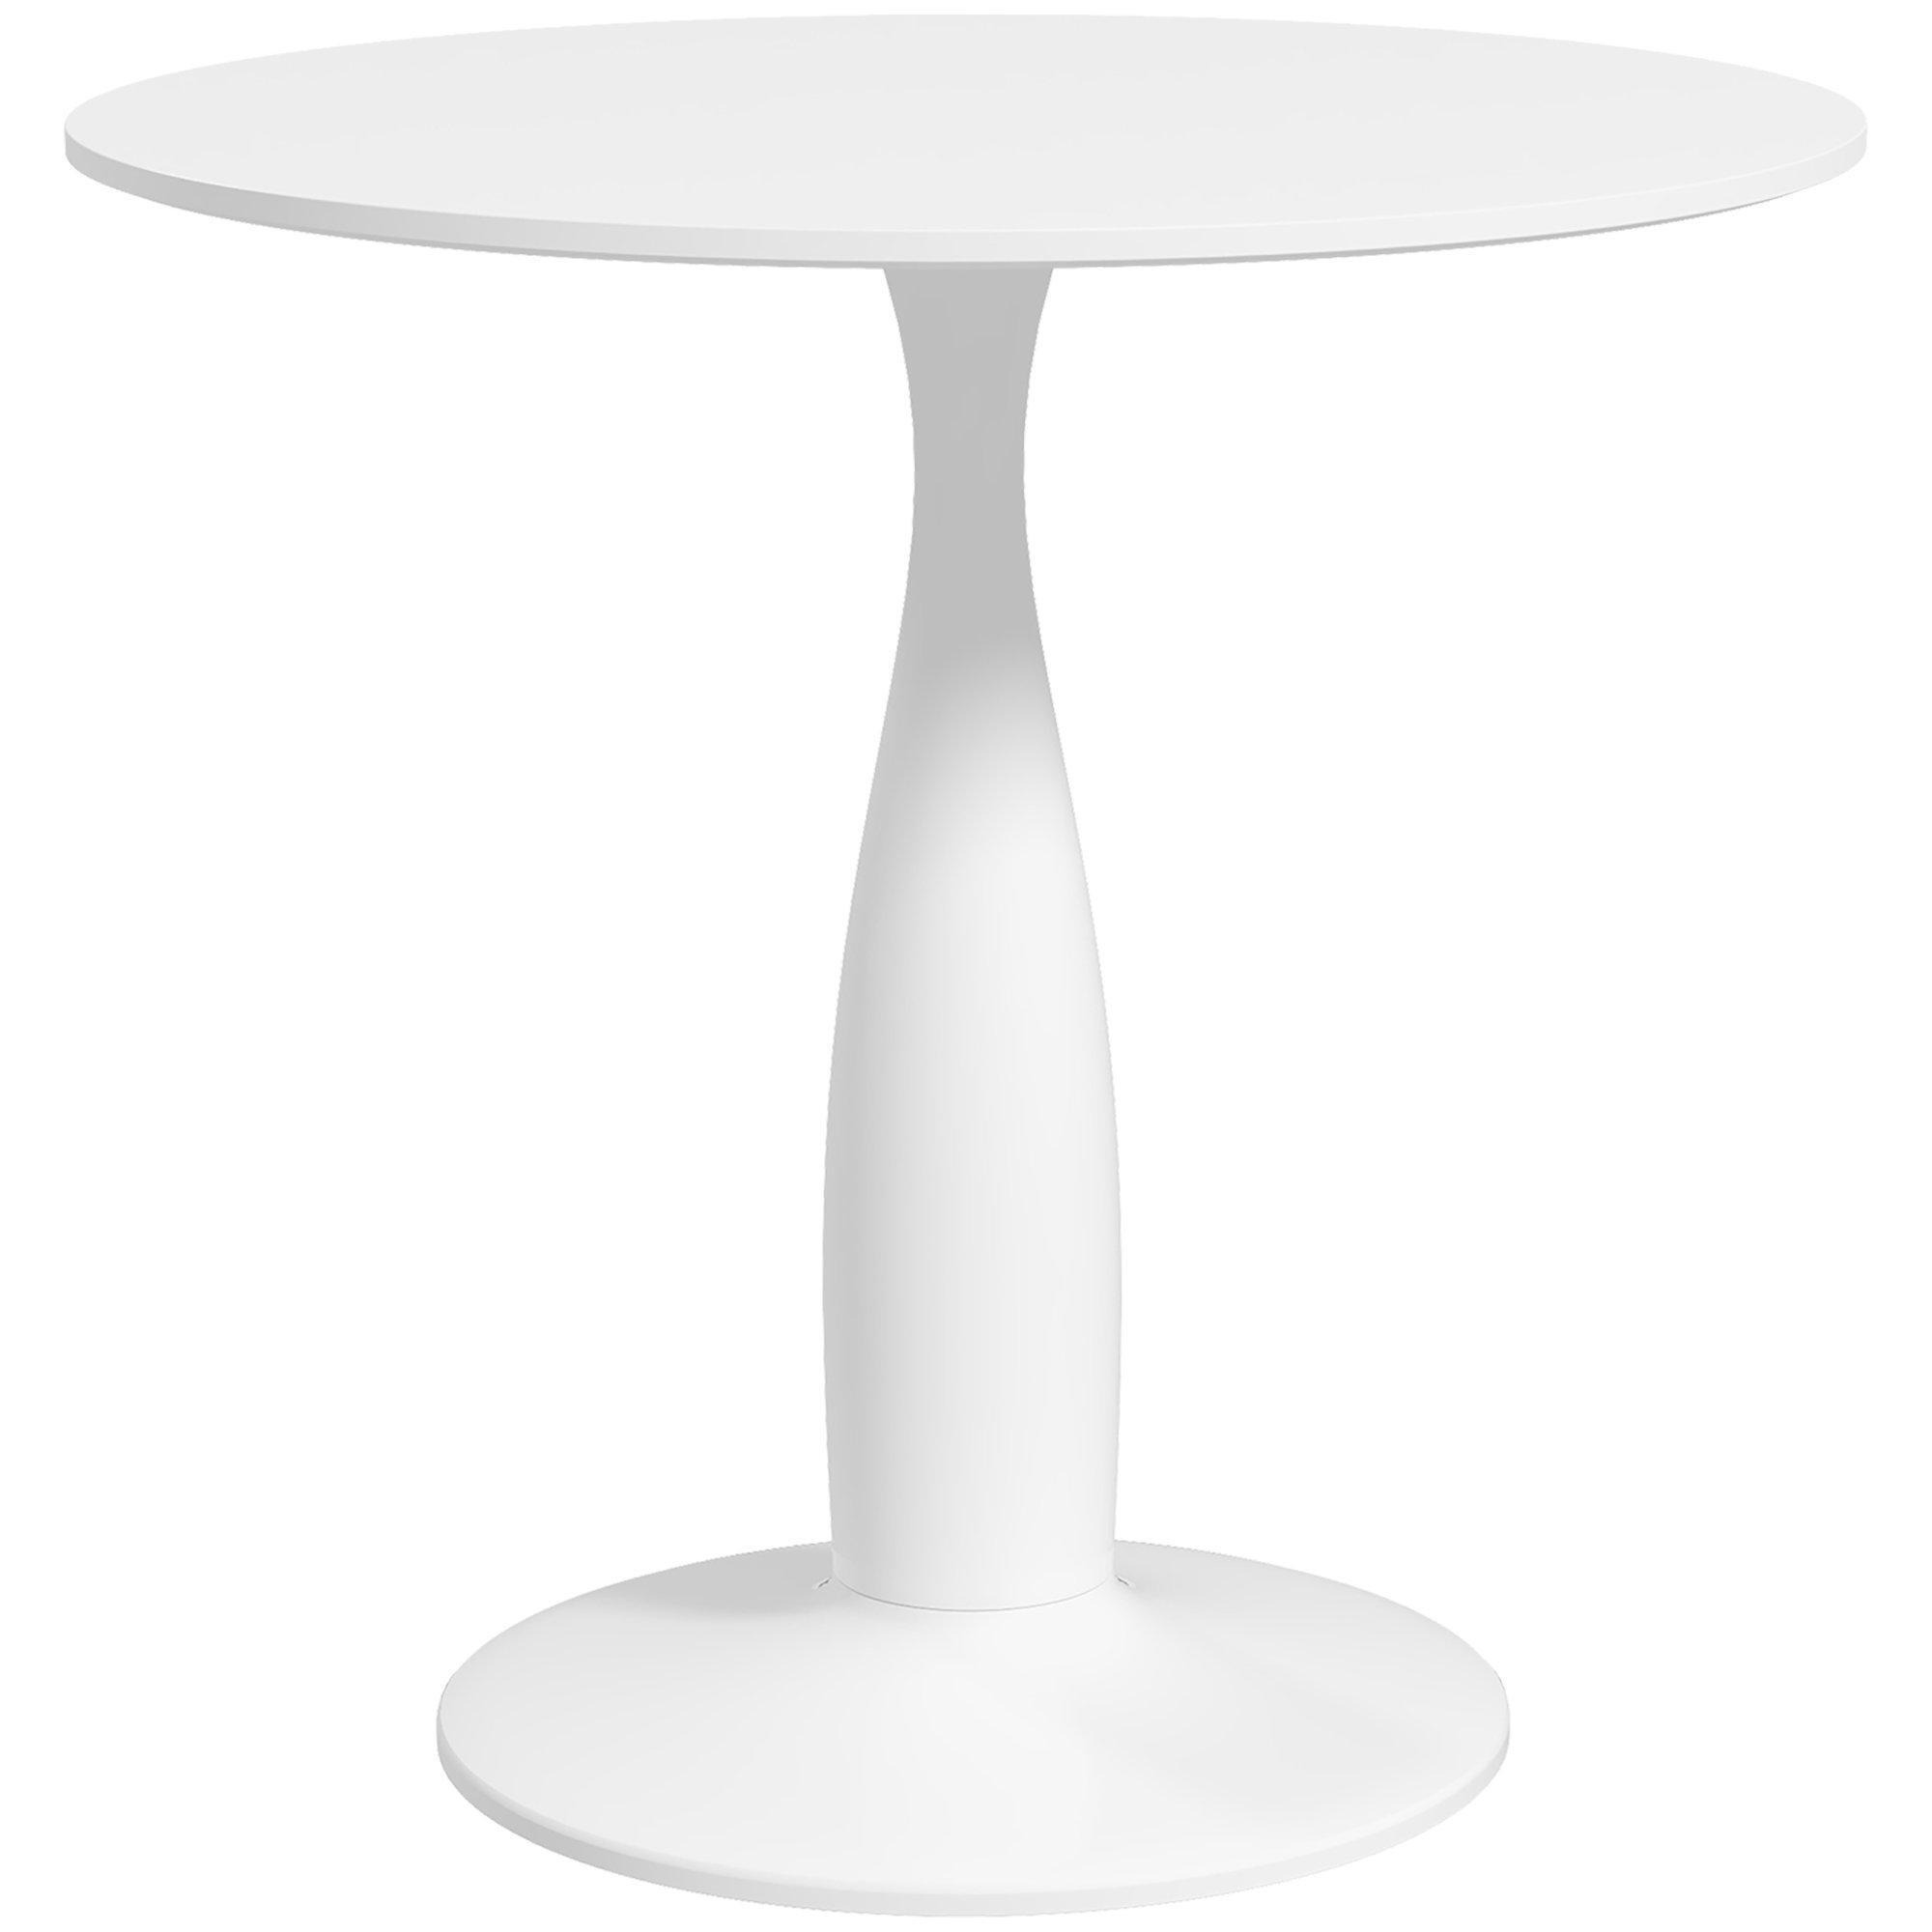 Round Dining Table Modern Kitchen Table with Steel Base - image 1